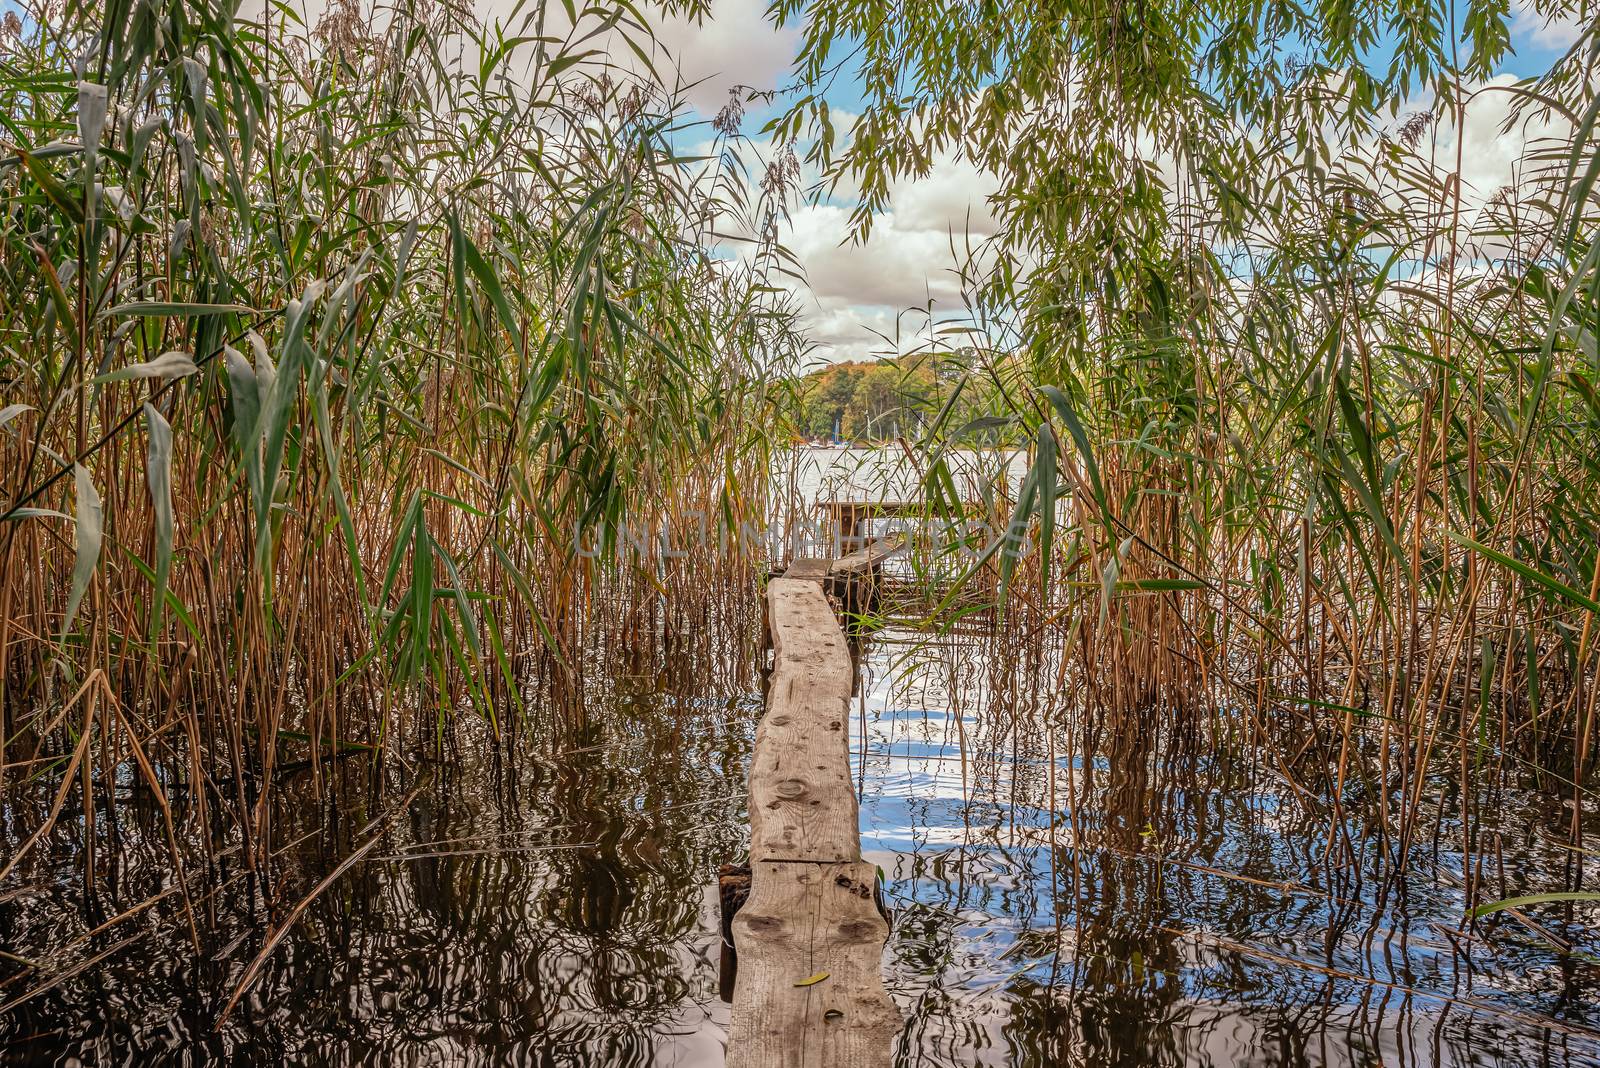 Boardwalk at a lake with reed by RobertChlopas